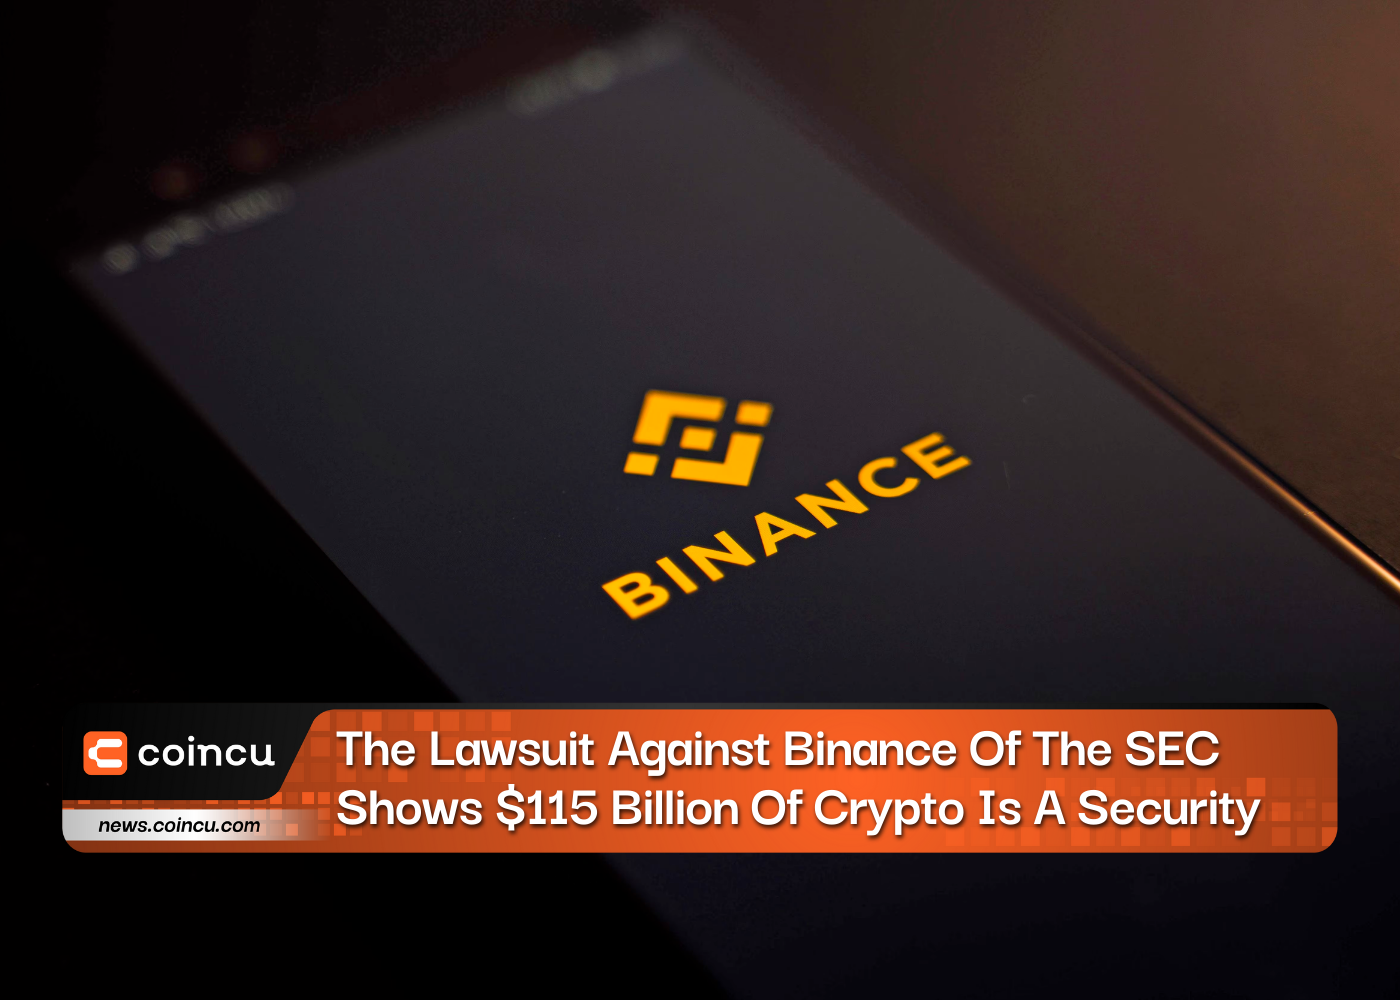 The Lawsuit Against Binance Of The SEC Shows $115 Billion Of Crypto Is A Security